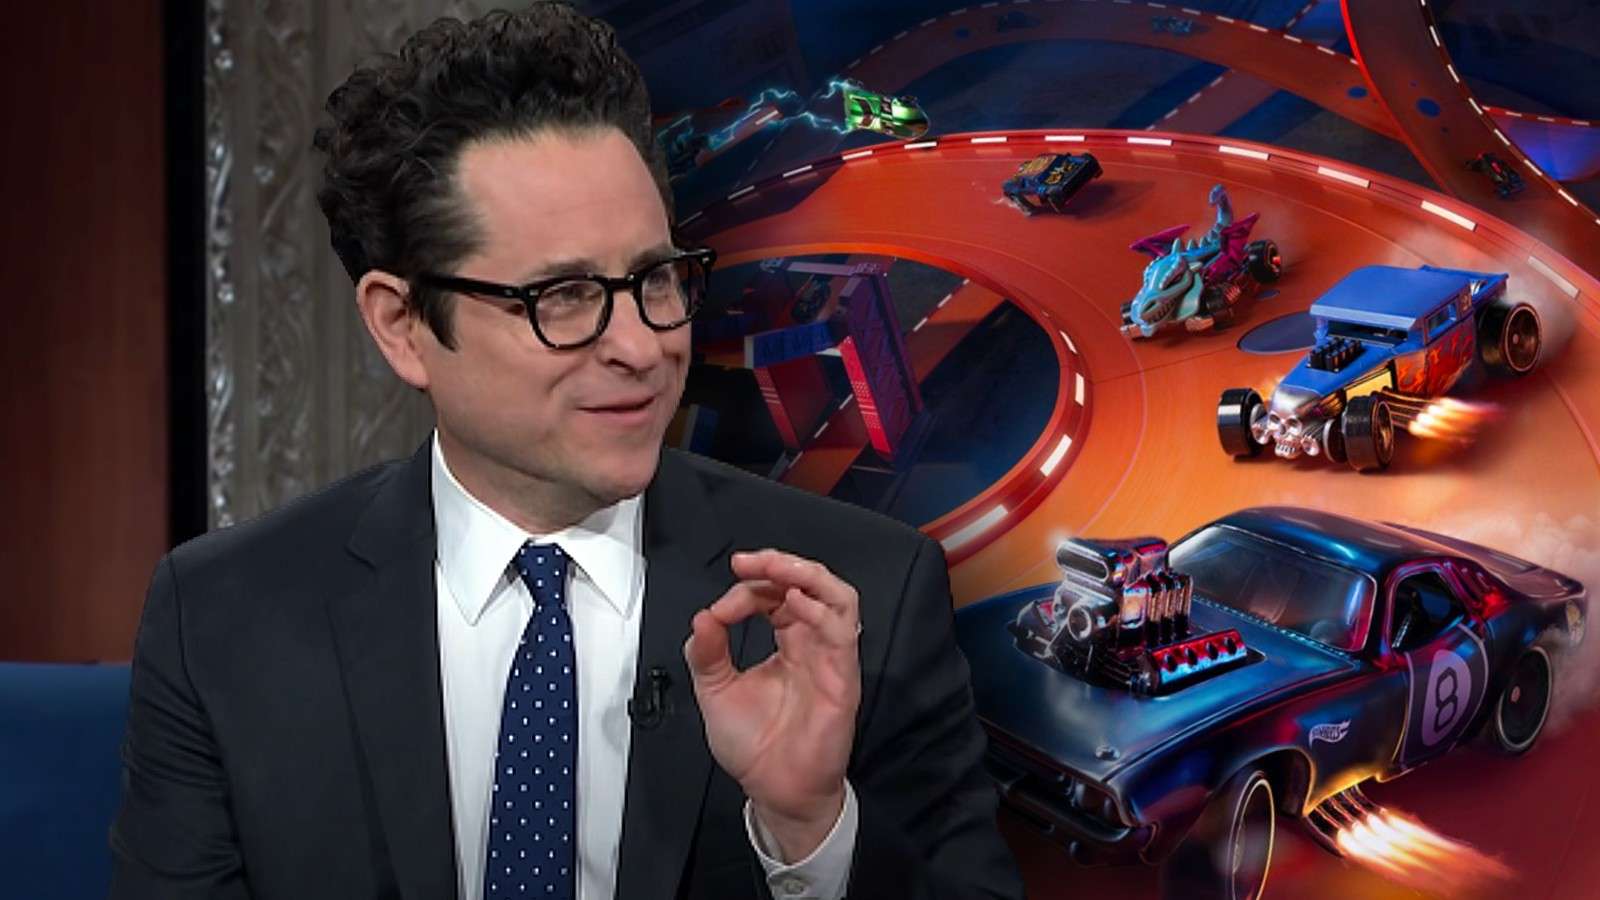 JJ Abrams and Hot Wheels